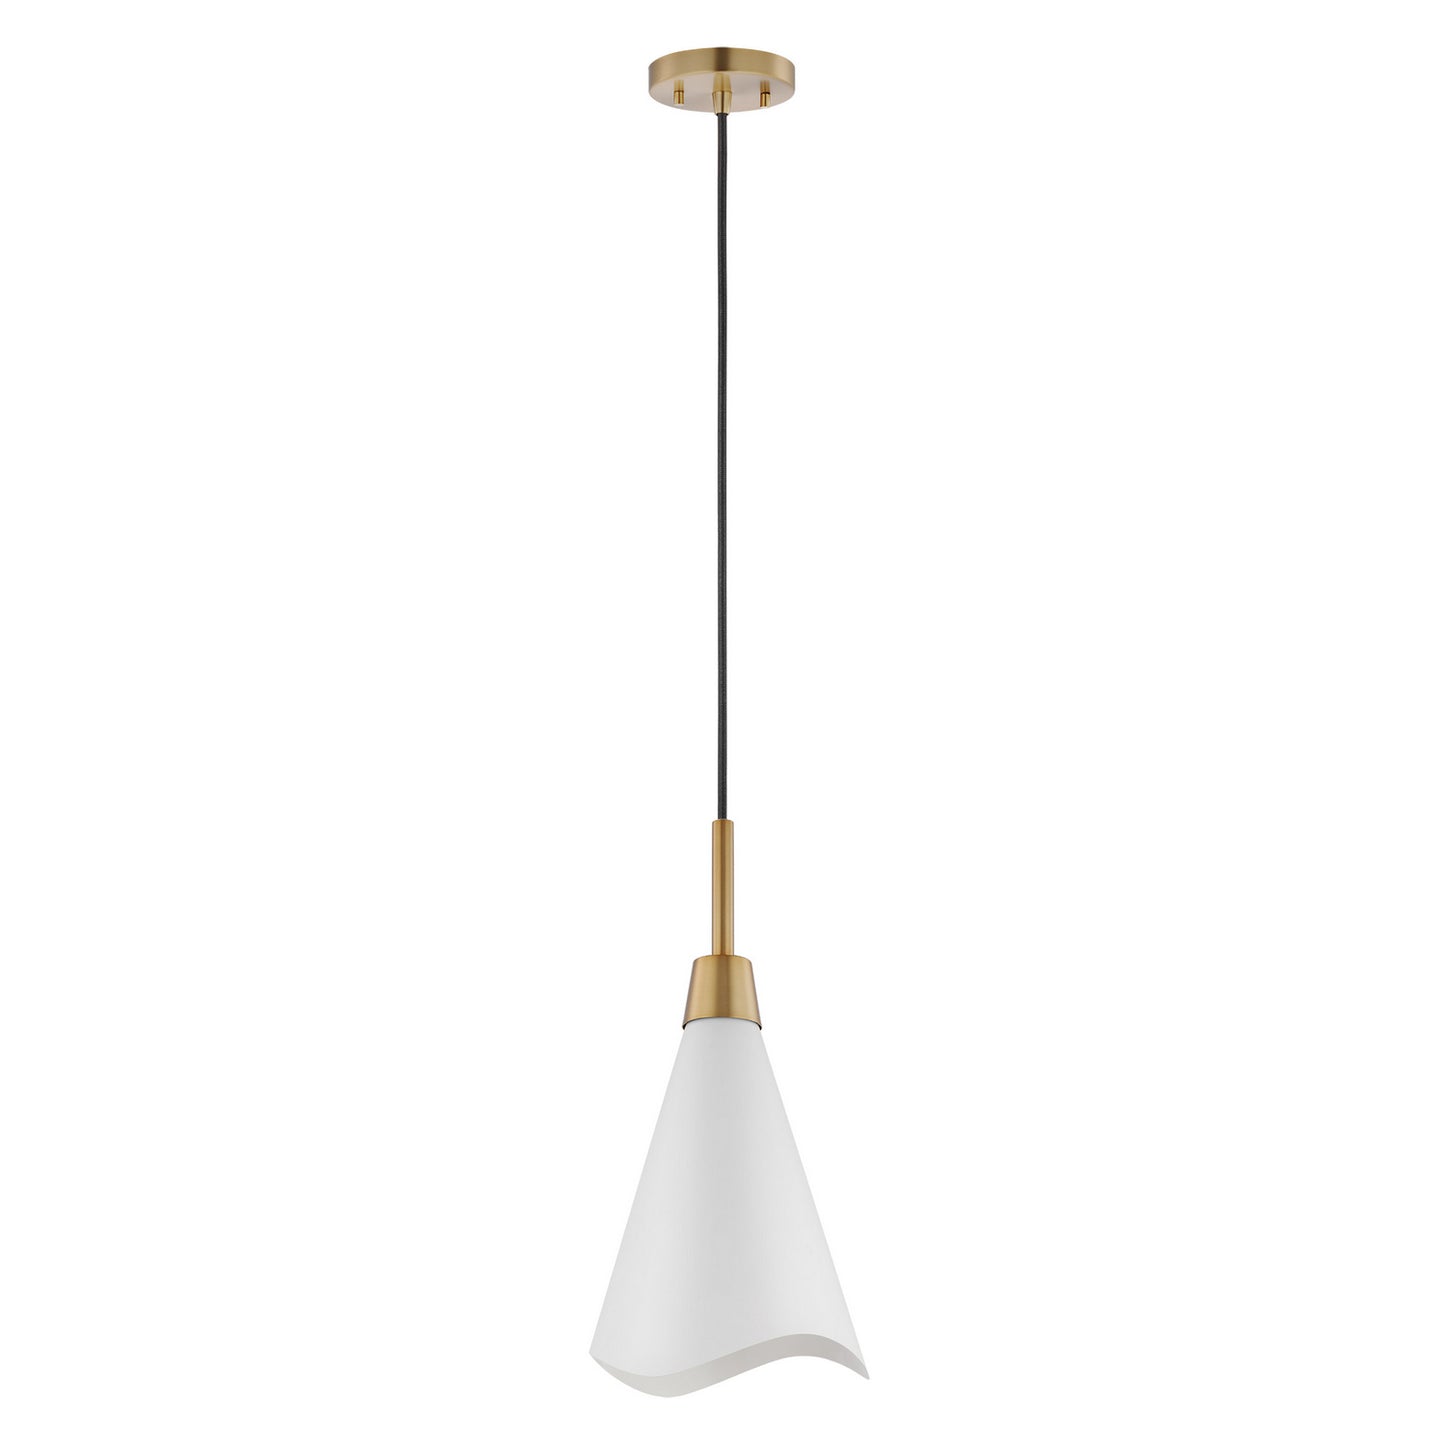 Tango One Light Pendant by Nuvo Lighting in Matte White / Burnished Brass Finish (60-7471)